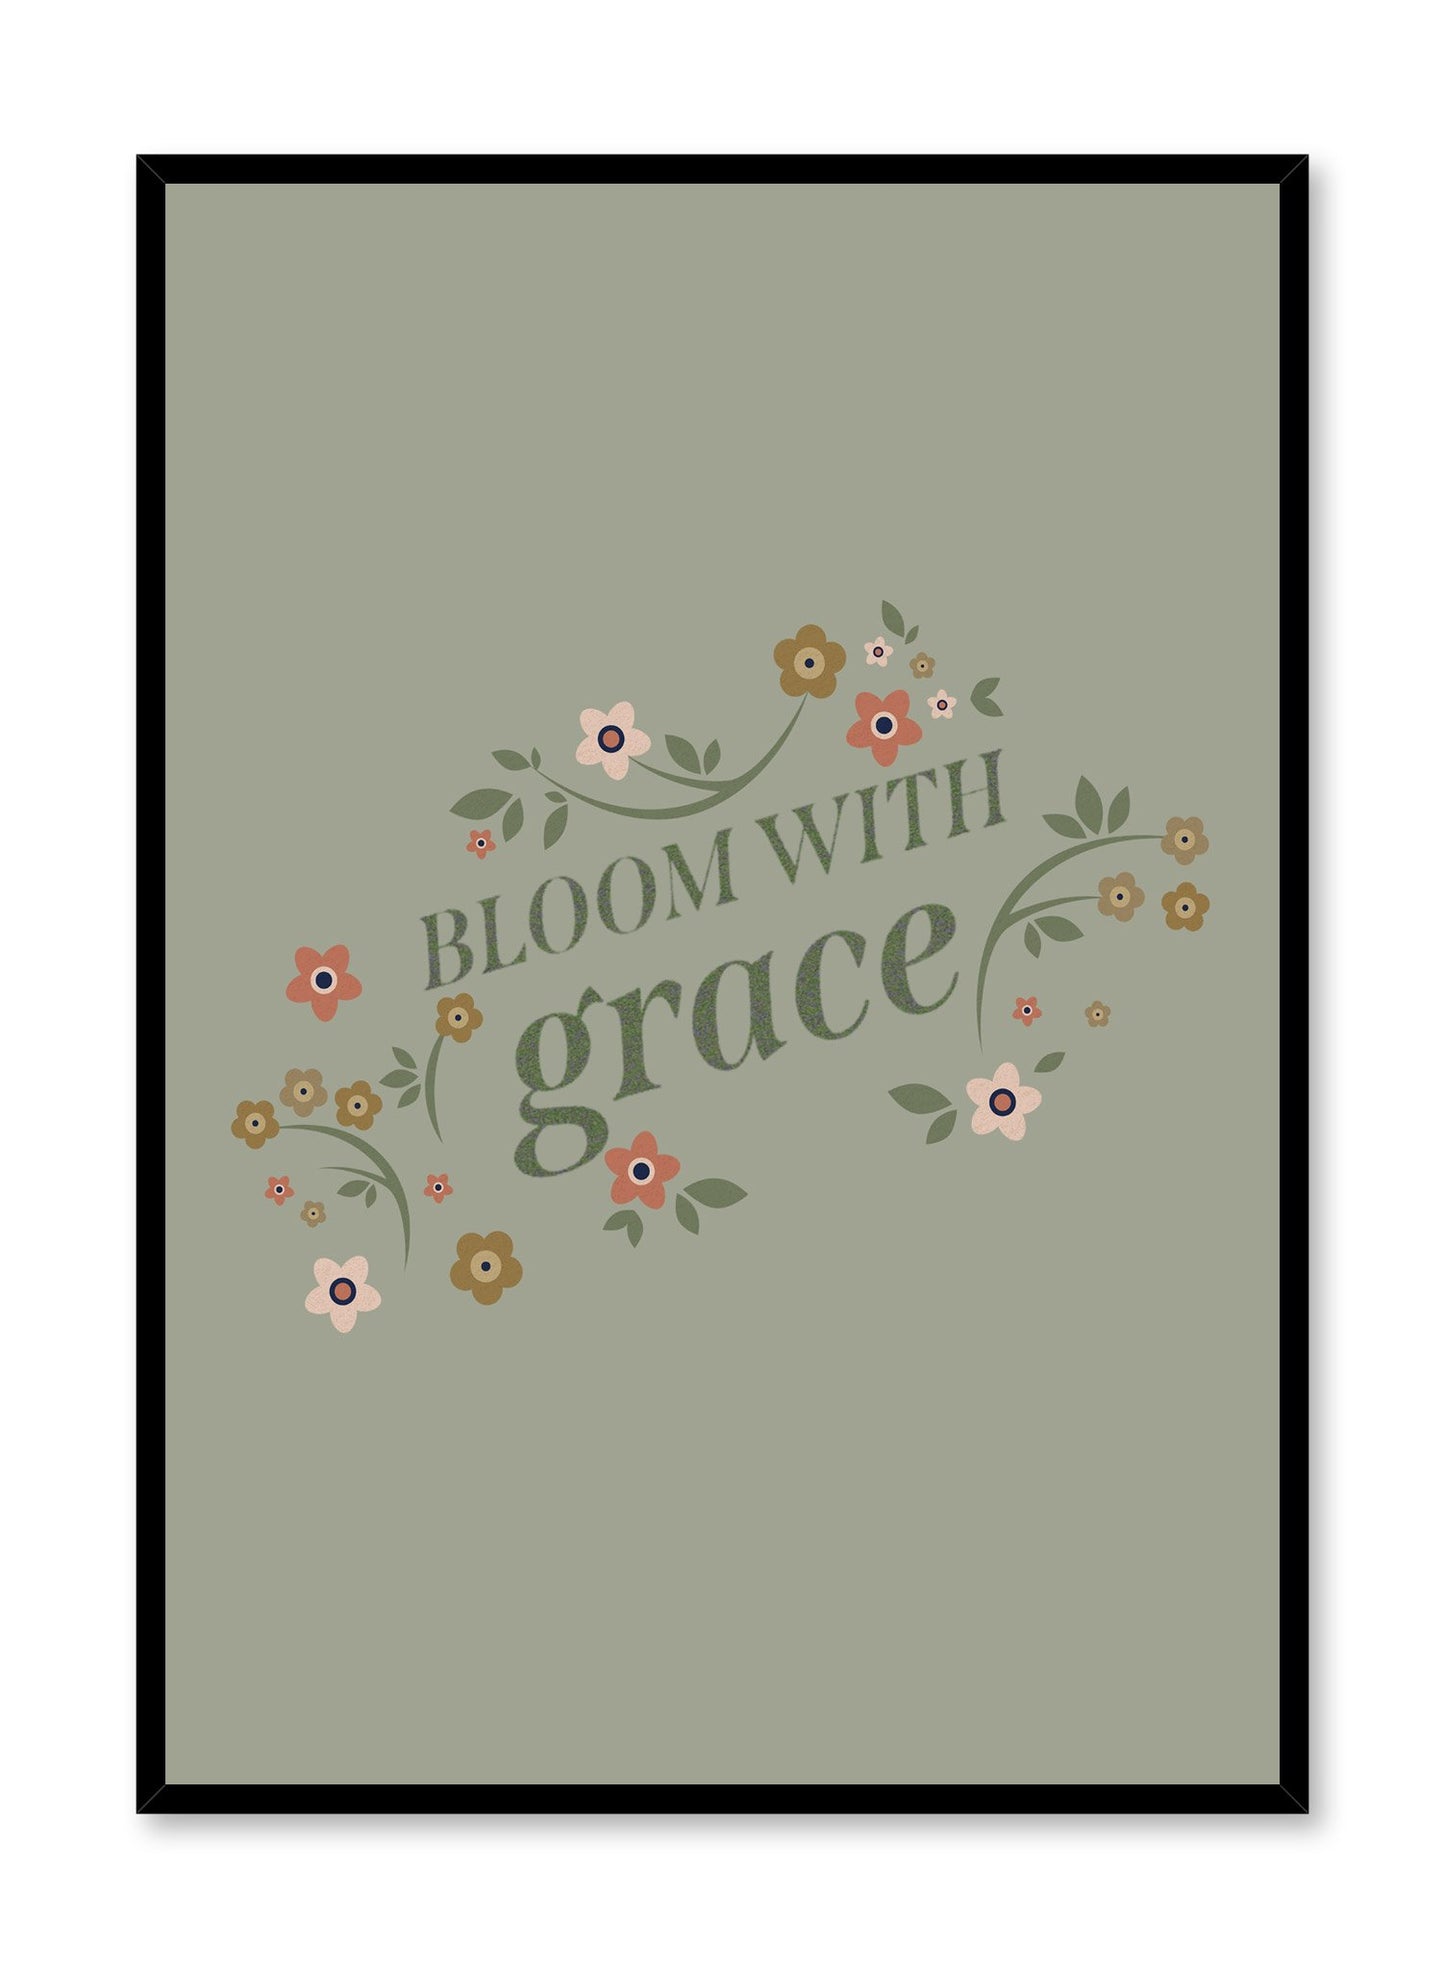 Modern minimalist typography illustration poster by Opposite Wall with Bloom With Grace quote